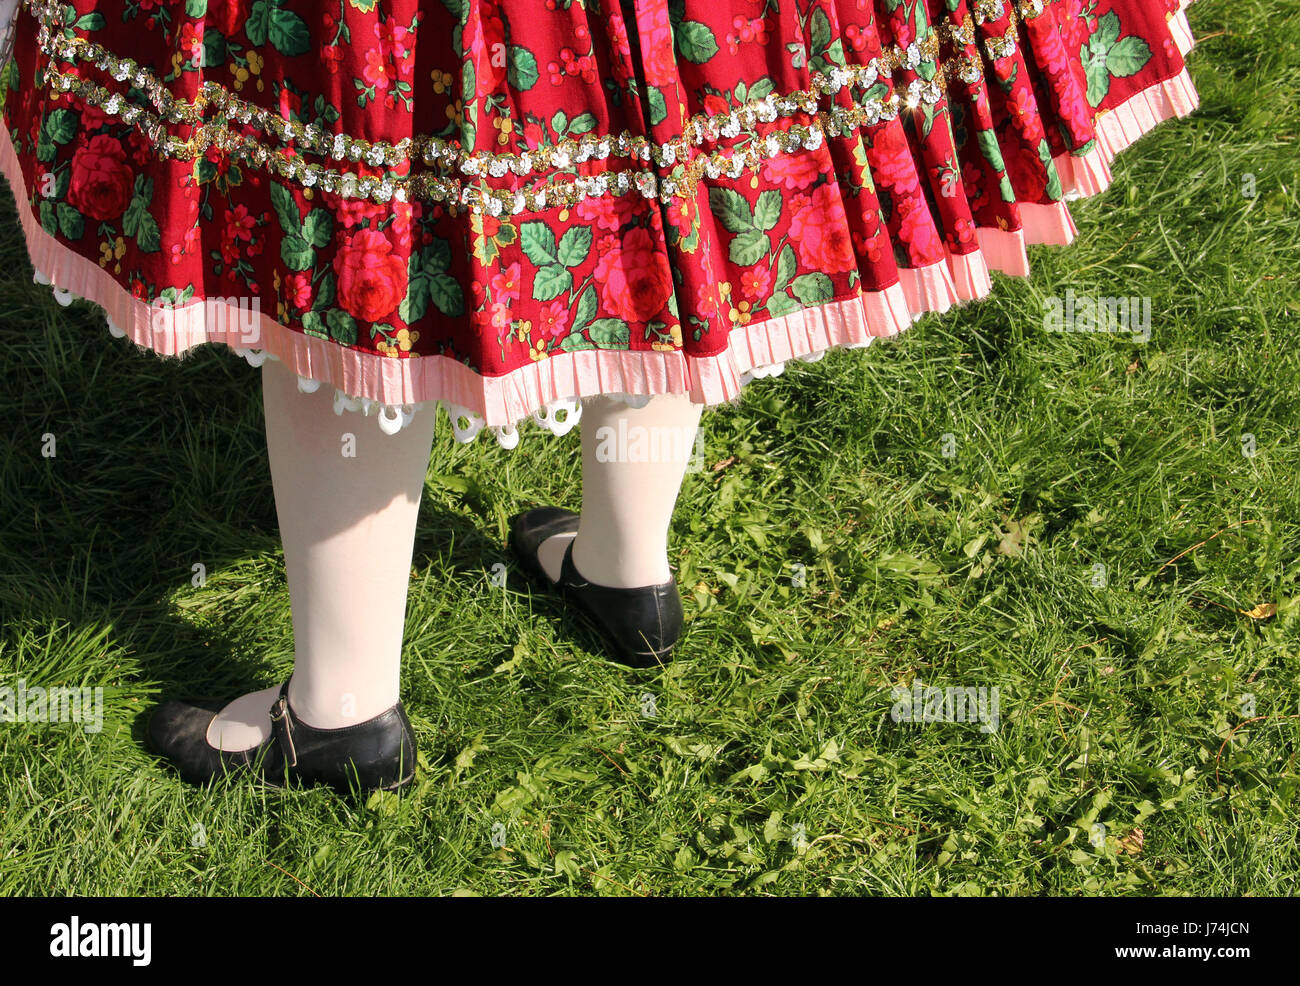 skirt culture party celebration traditional clothes individual clothing archaic Stock Photo